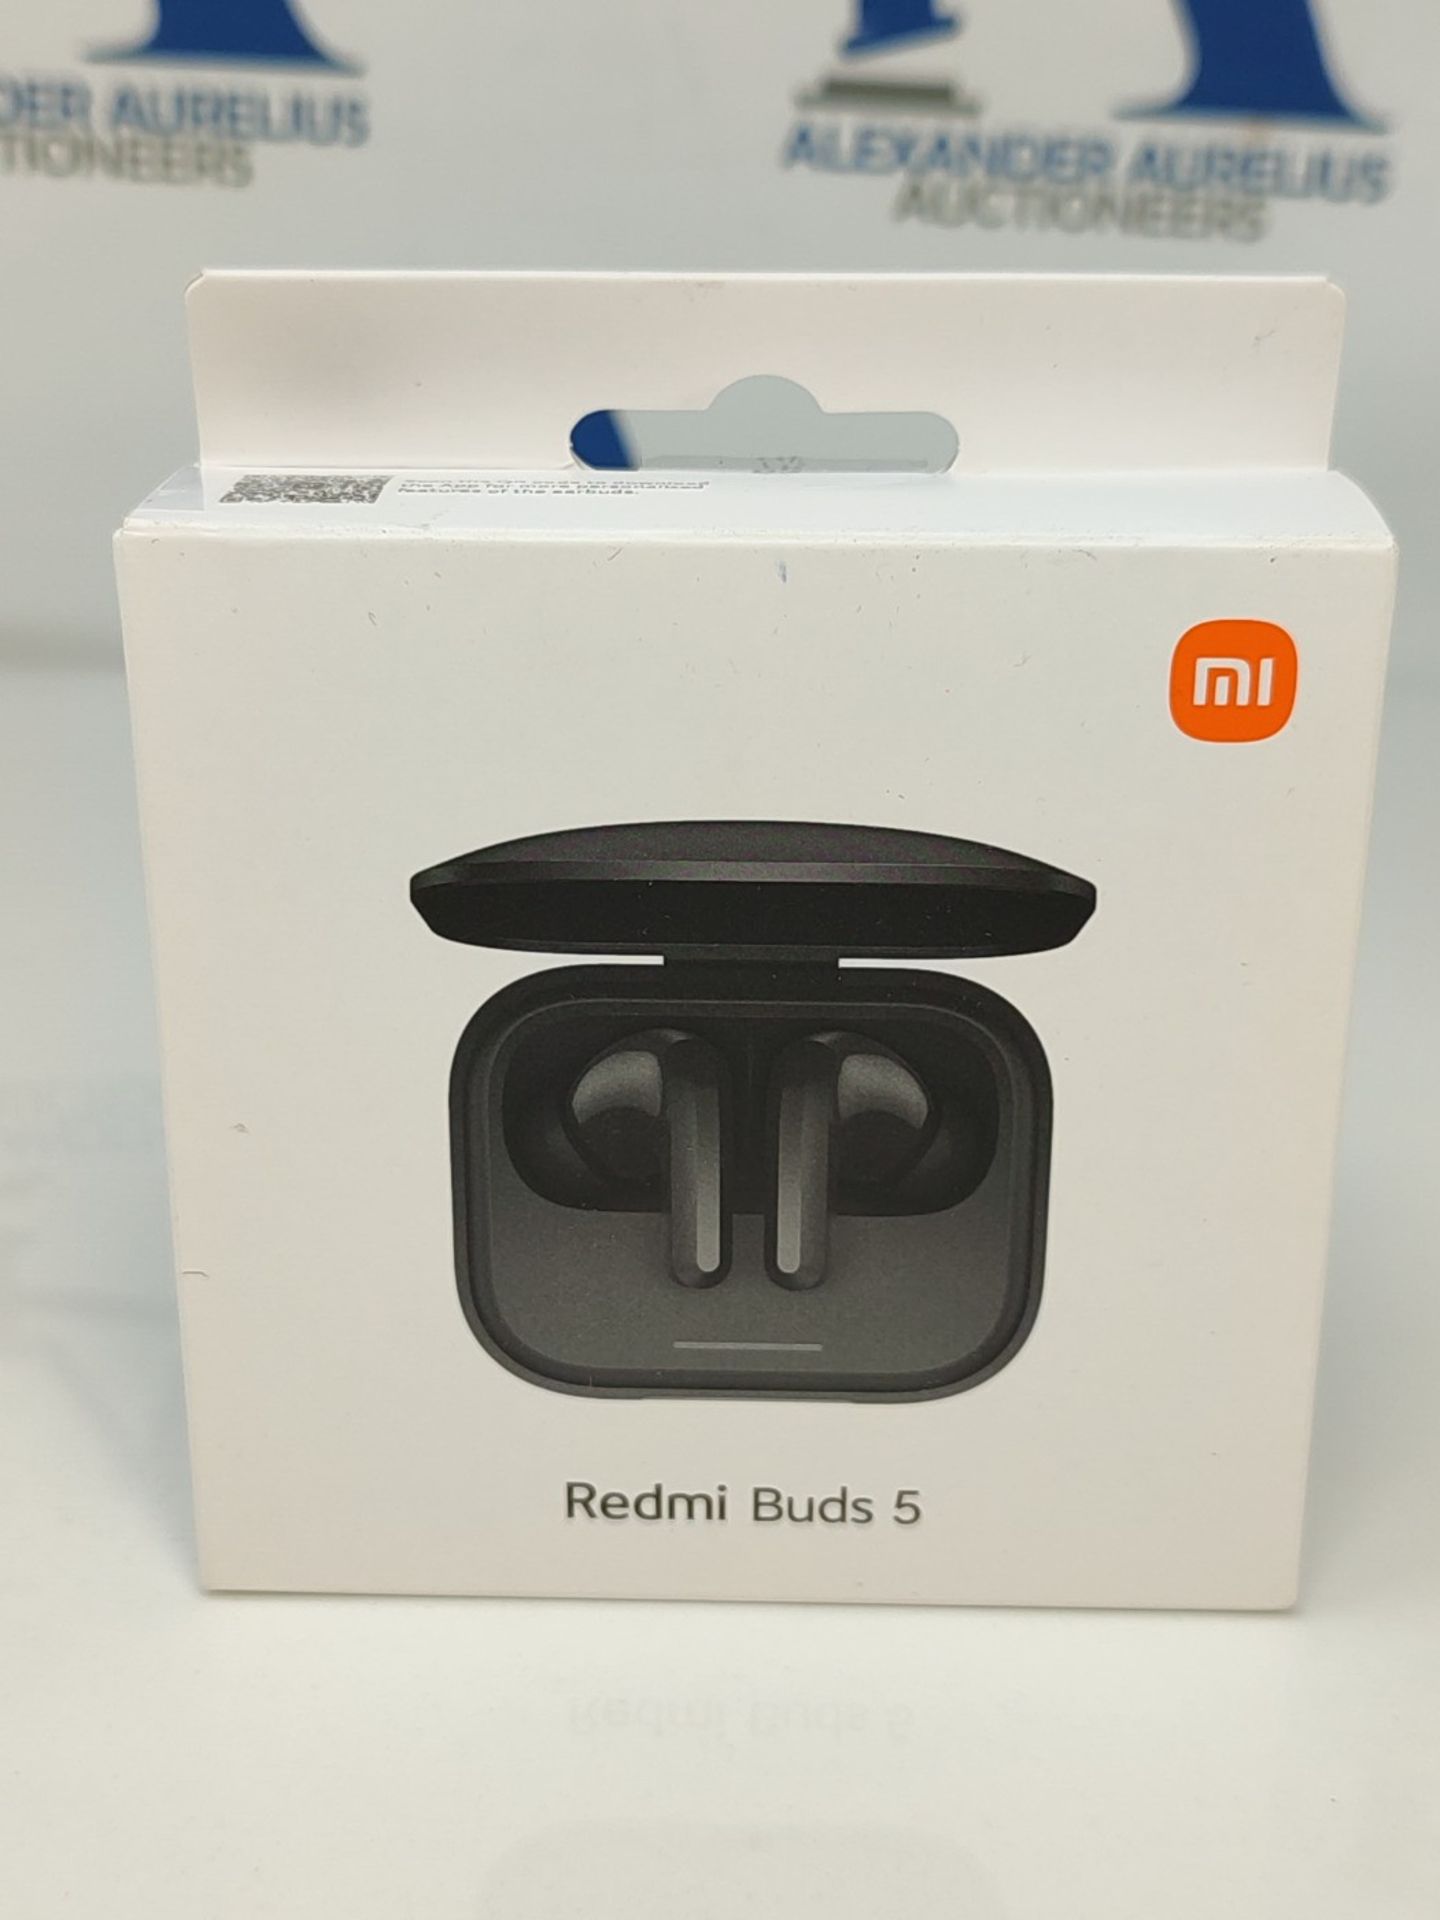 Xiaomi Redmi Buds 5, Bluetooth Earphones, 12.4mm Dynamic Driver, Active Noise Cancella - Image 5 of 6